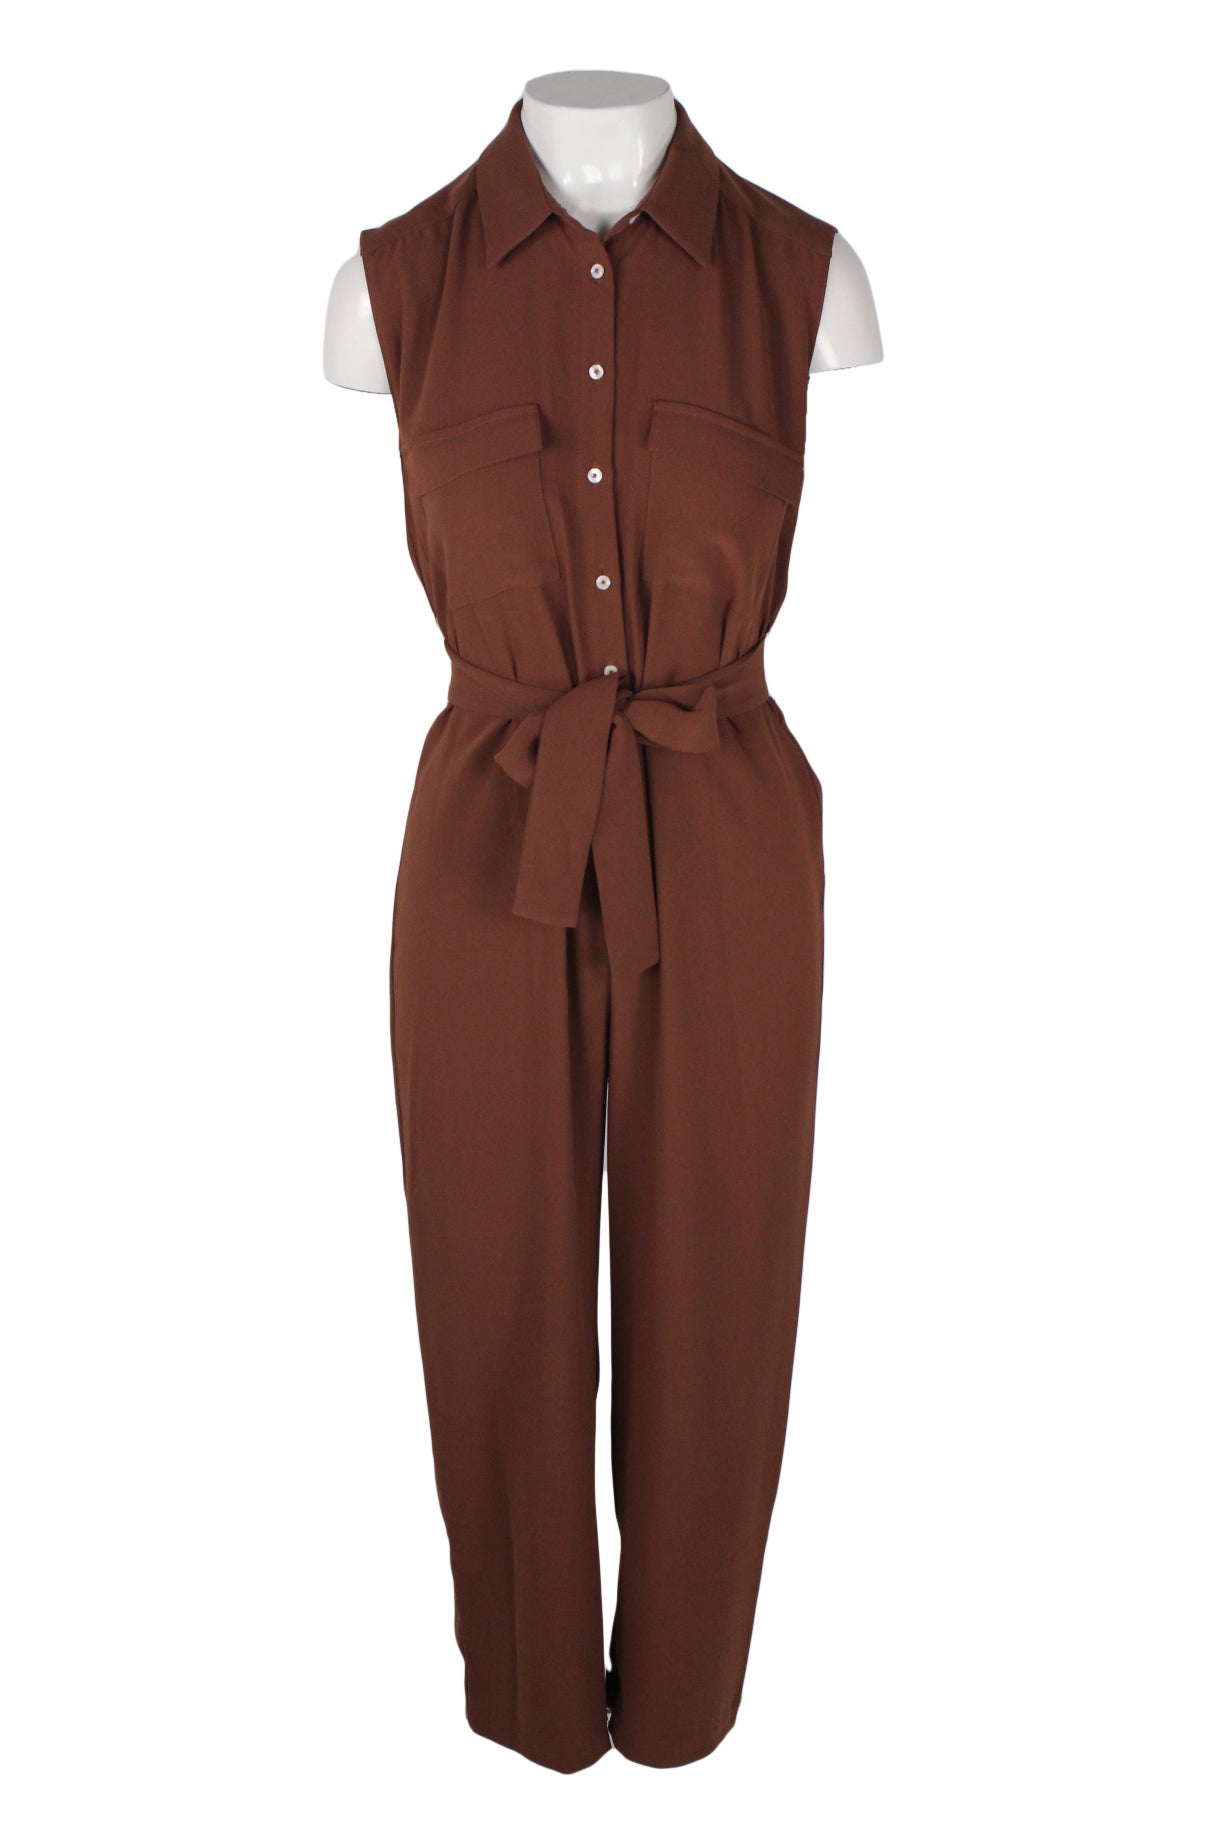 front of amanda uprichard brown sleeveless jumpsuit. features spread collard, flap pockets at bust, self tie belt, straight leg, and button closure. 